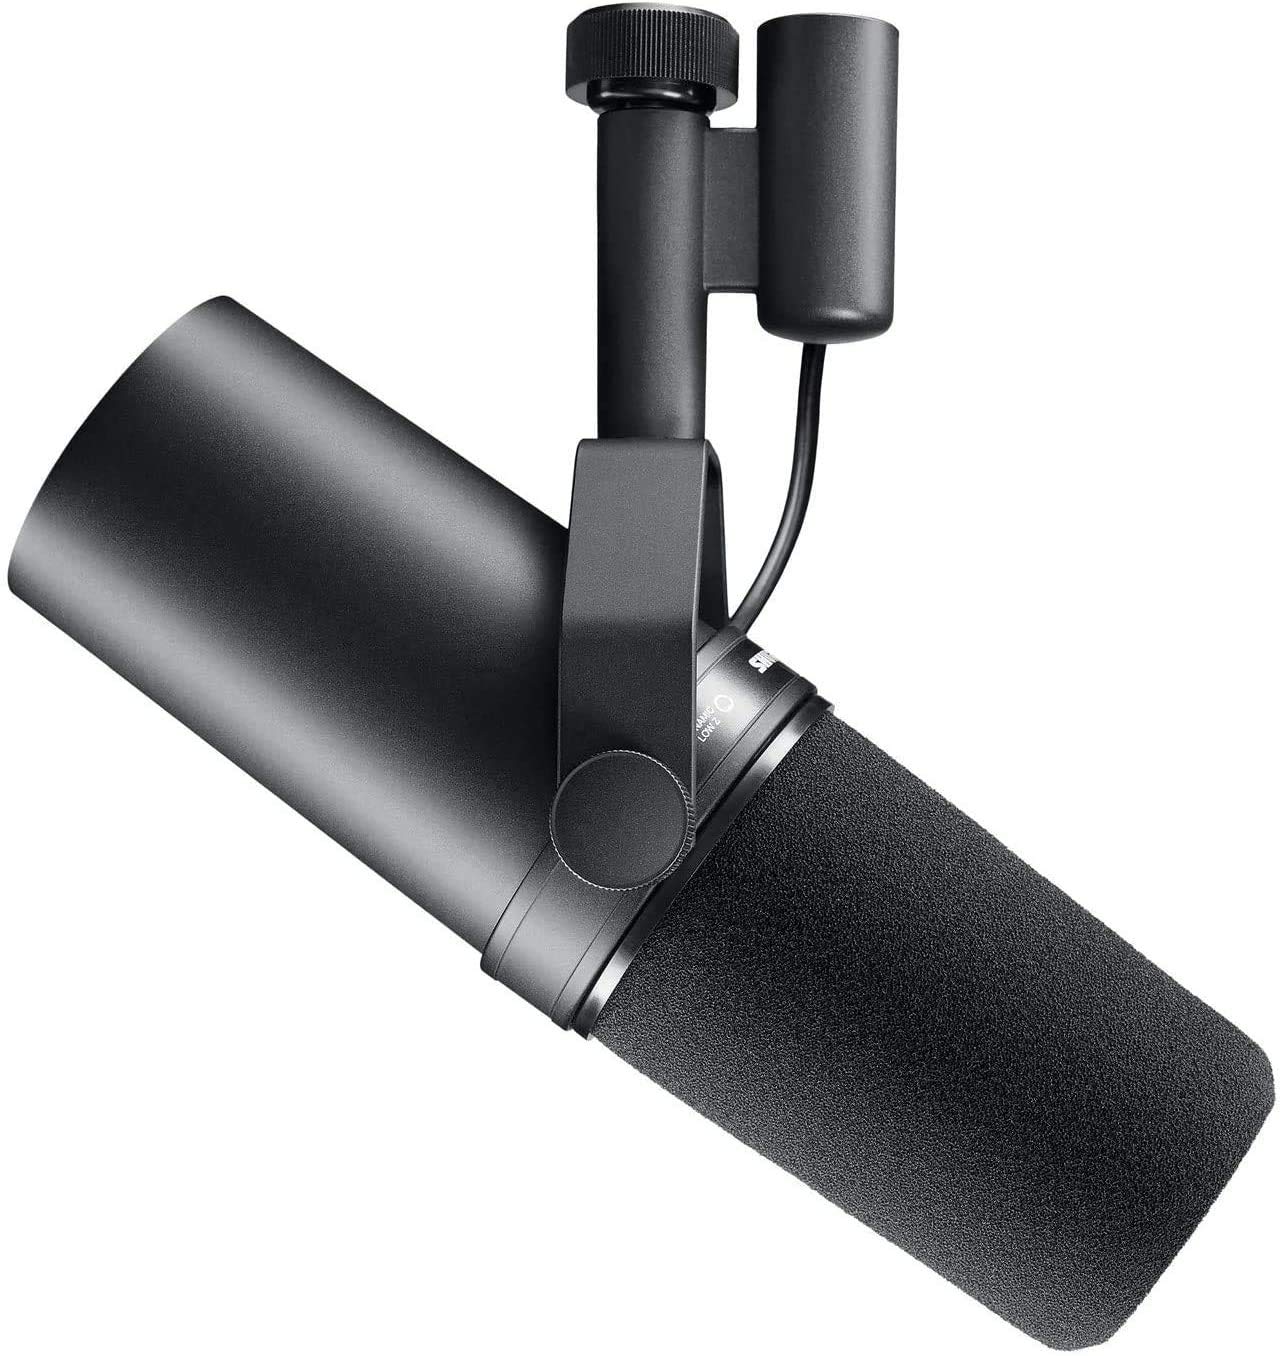 Shure SM7B Dynamic Vocal Microphone $359 at Amazon